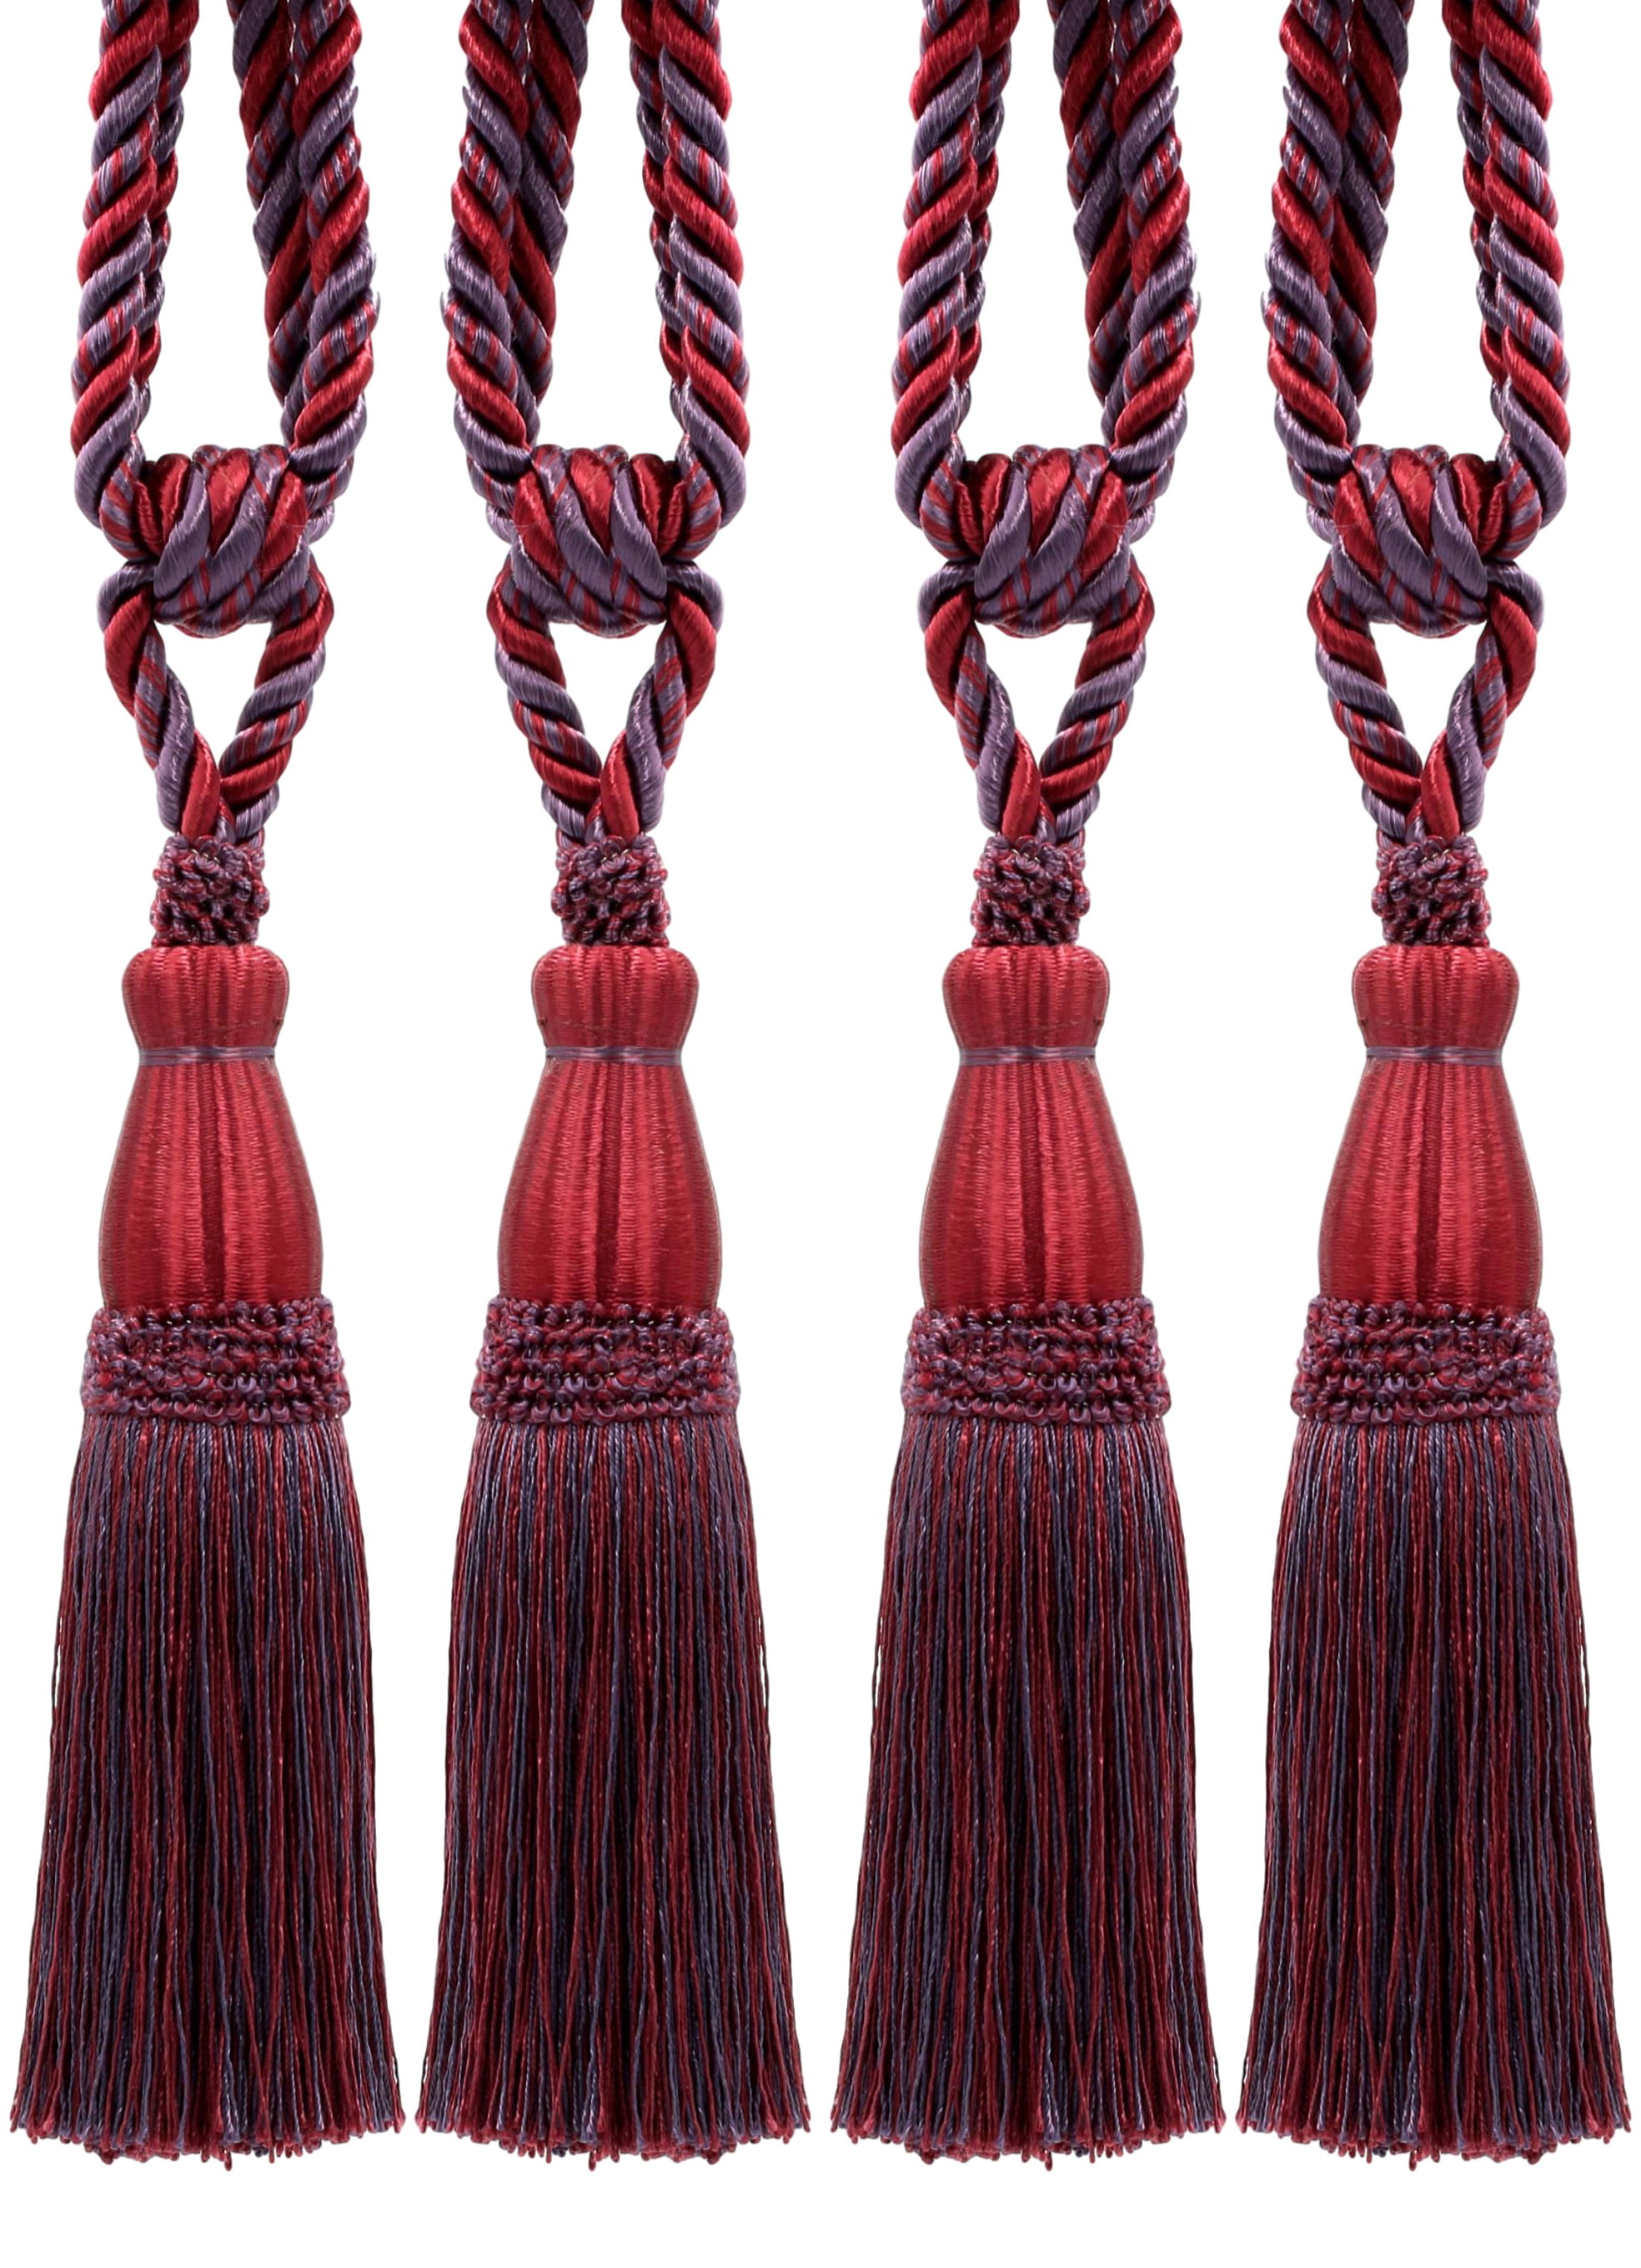 Curtain& Chair Tie-Back 2 colors to choose from! 30"spread with 8"tassel 